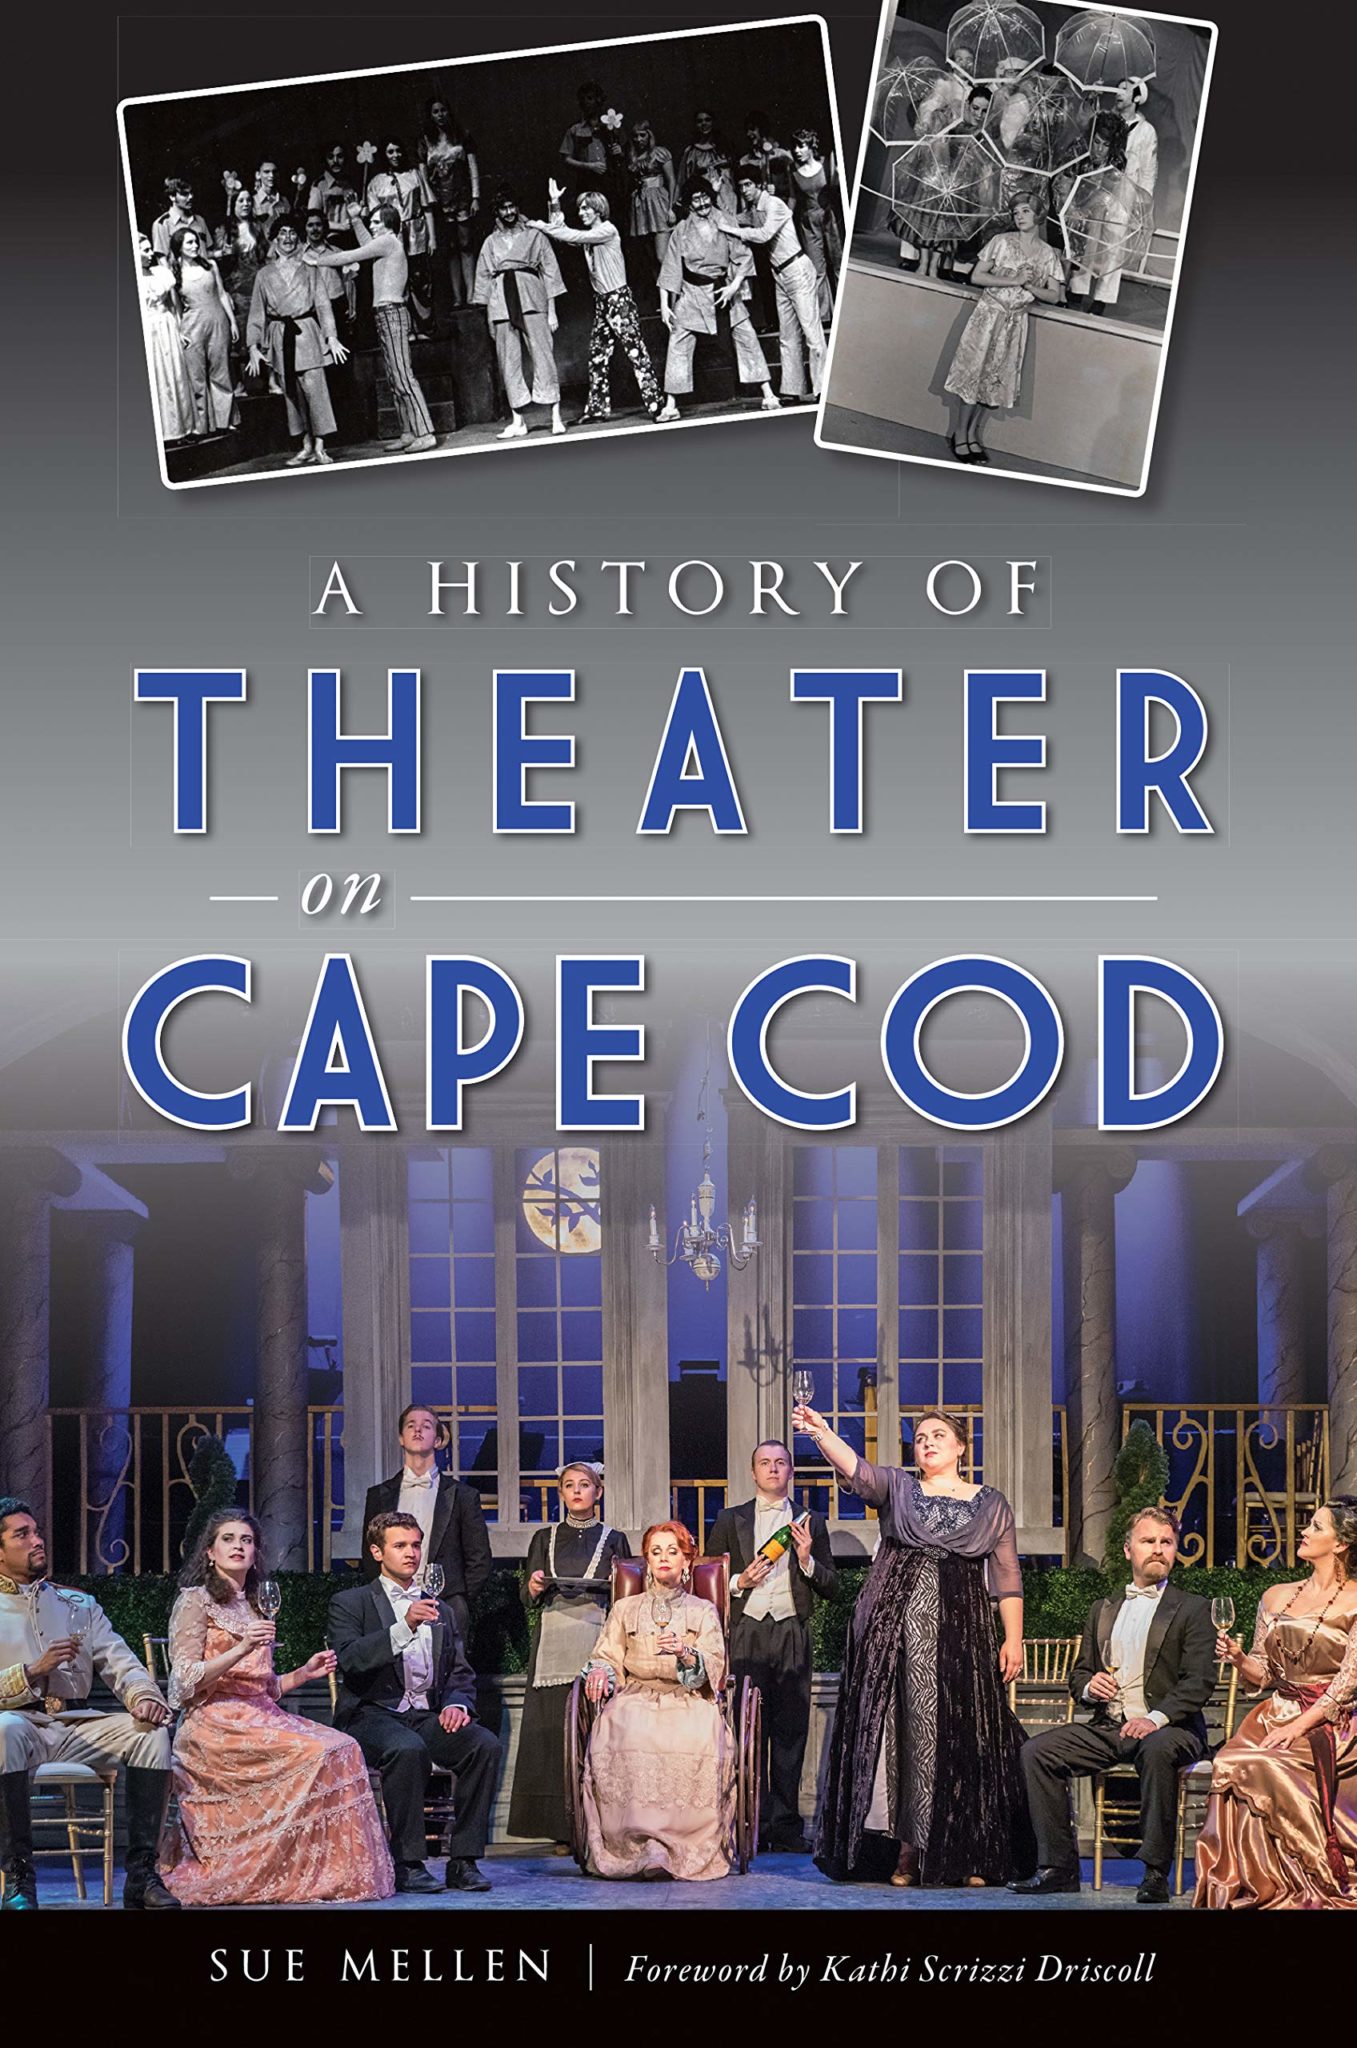 VIRTUAL TALK “A History of Theater on Cape Cod” with Susan Mellen